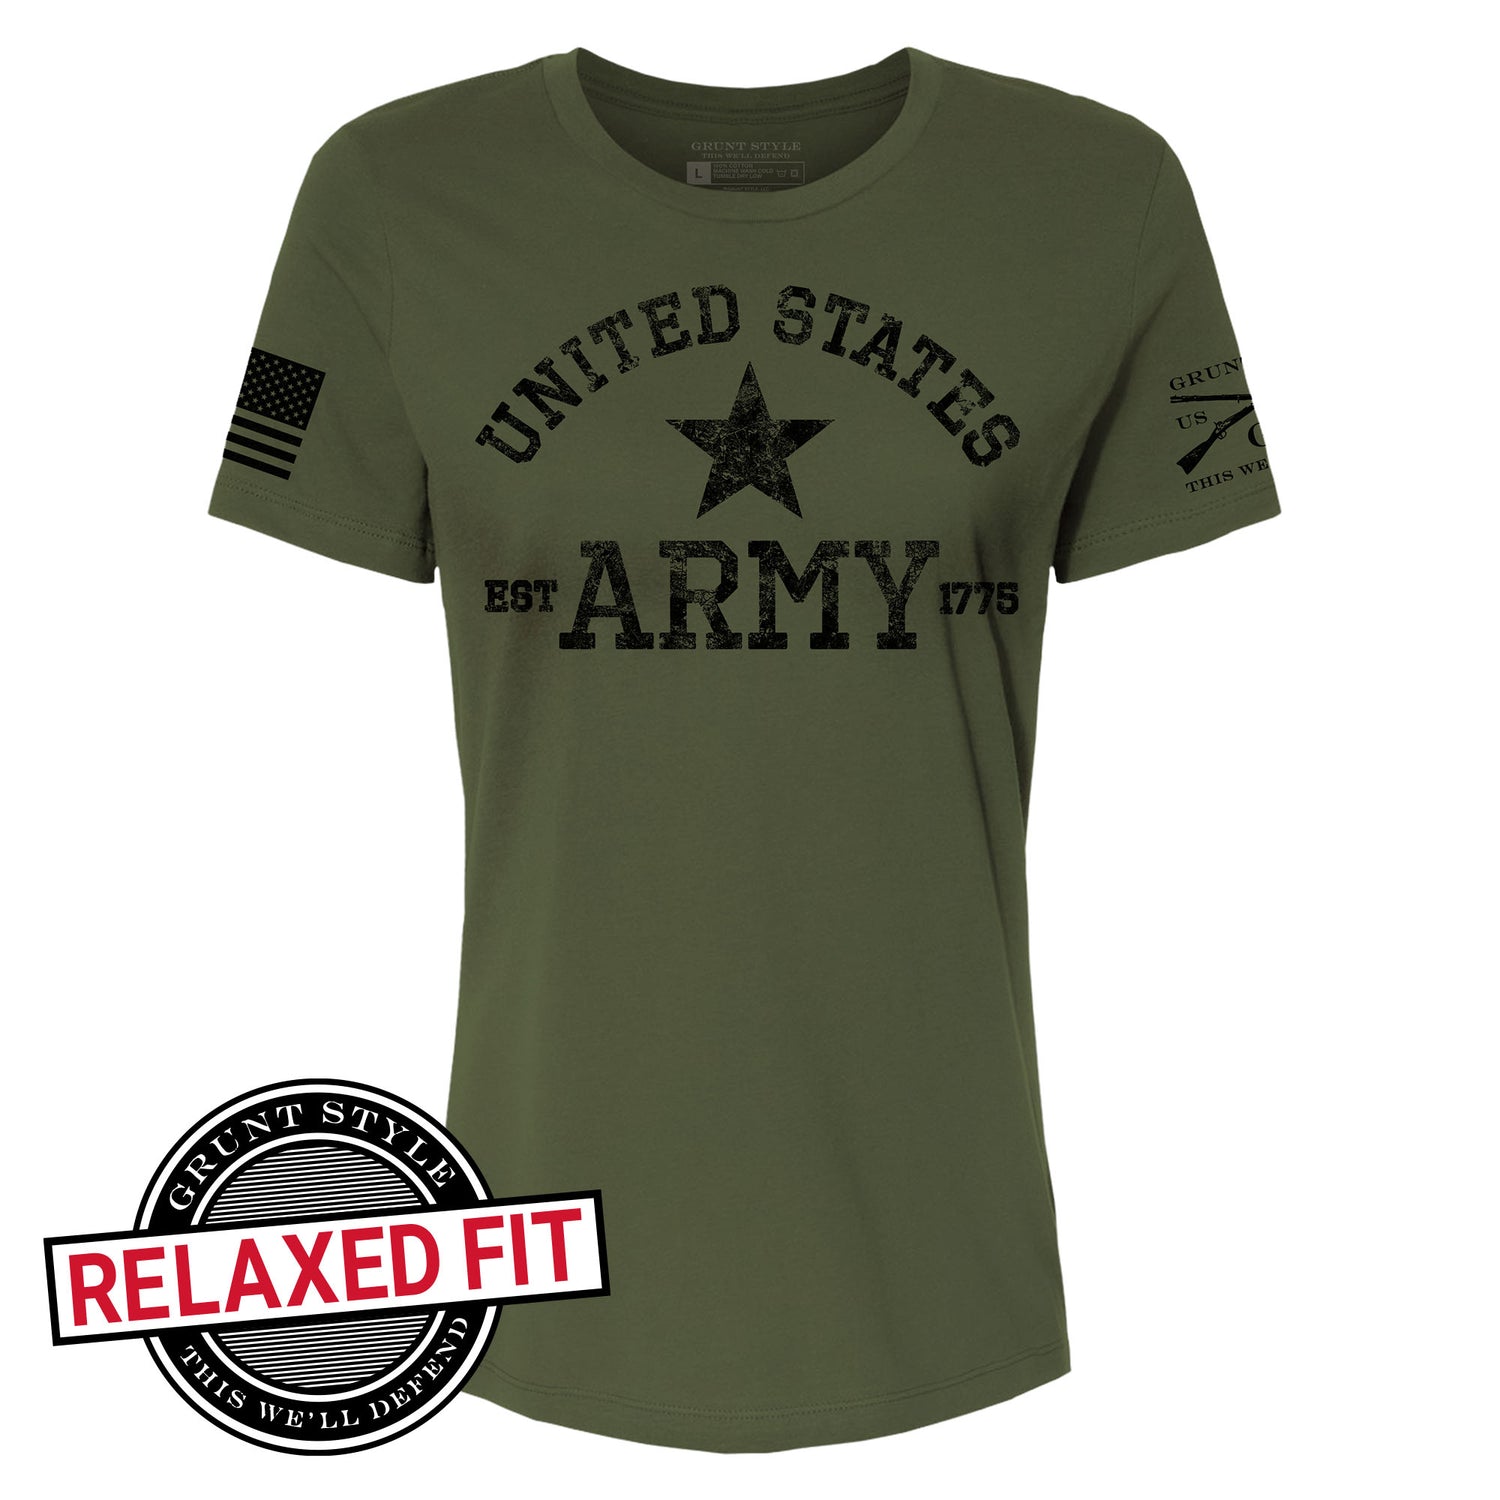 Army Shirt for Women - relaxed Fit 